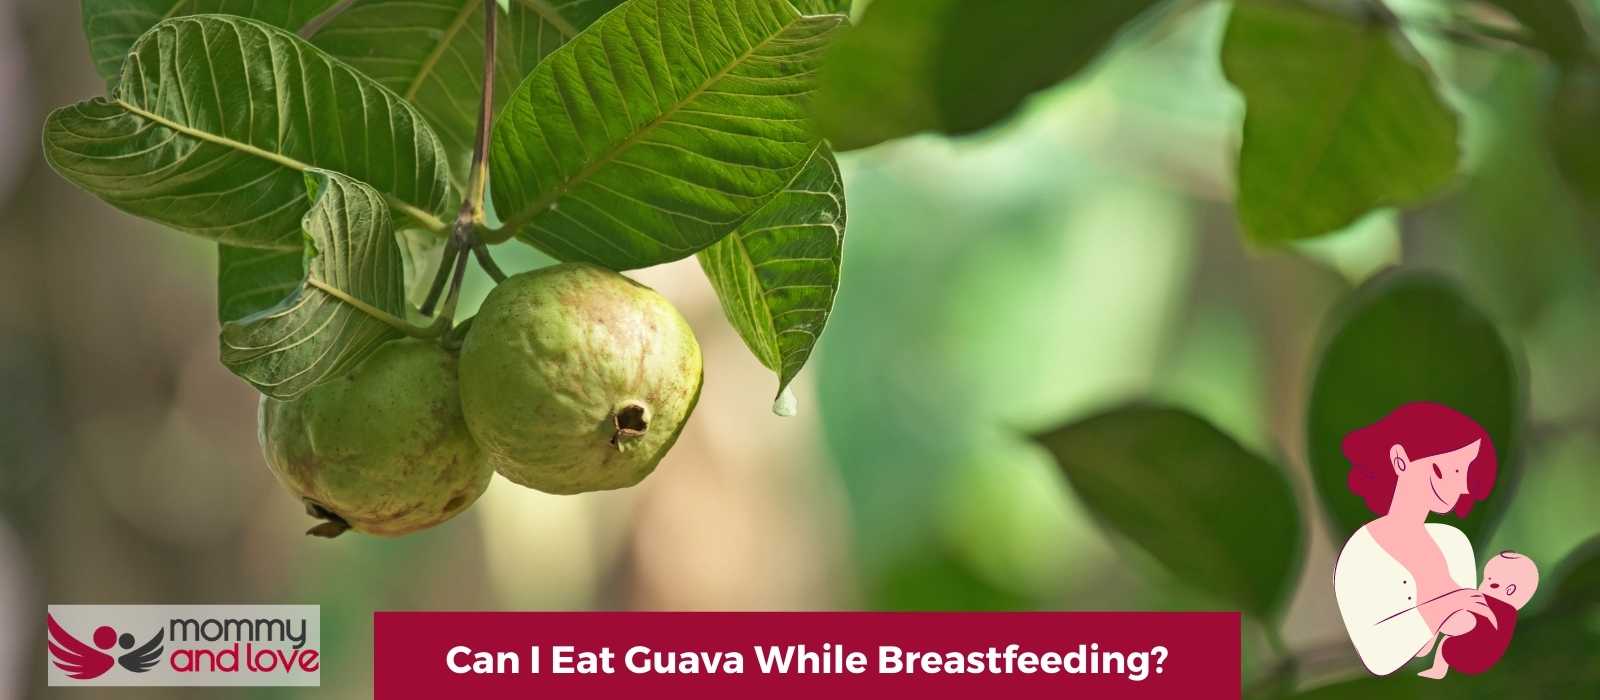 Can I Eat Guava While Breastfeeding